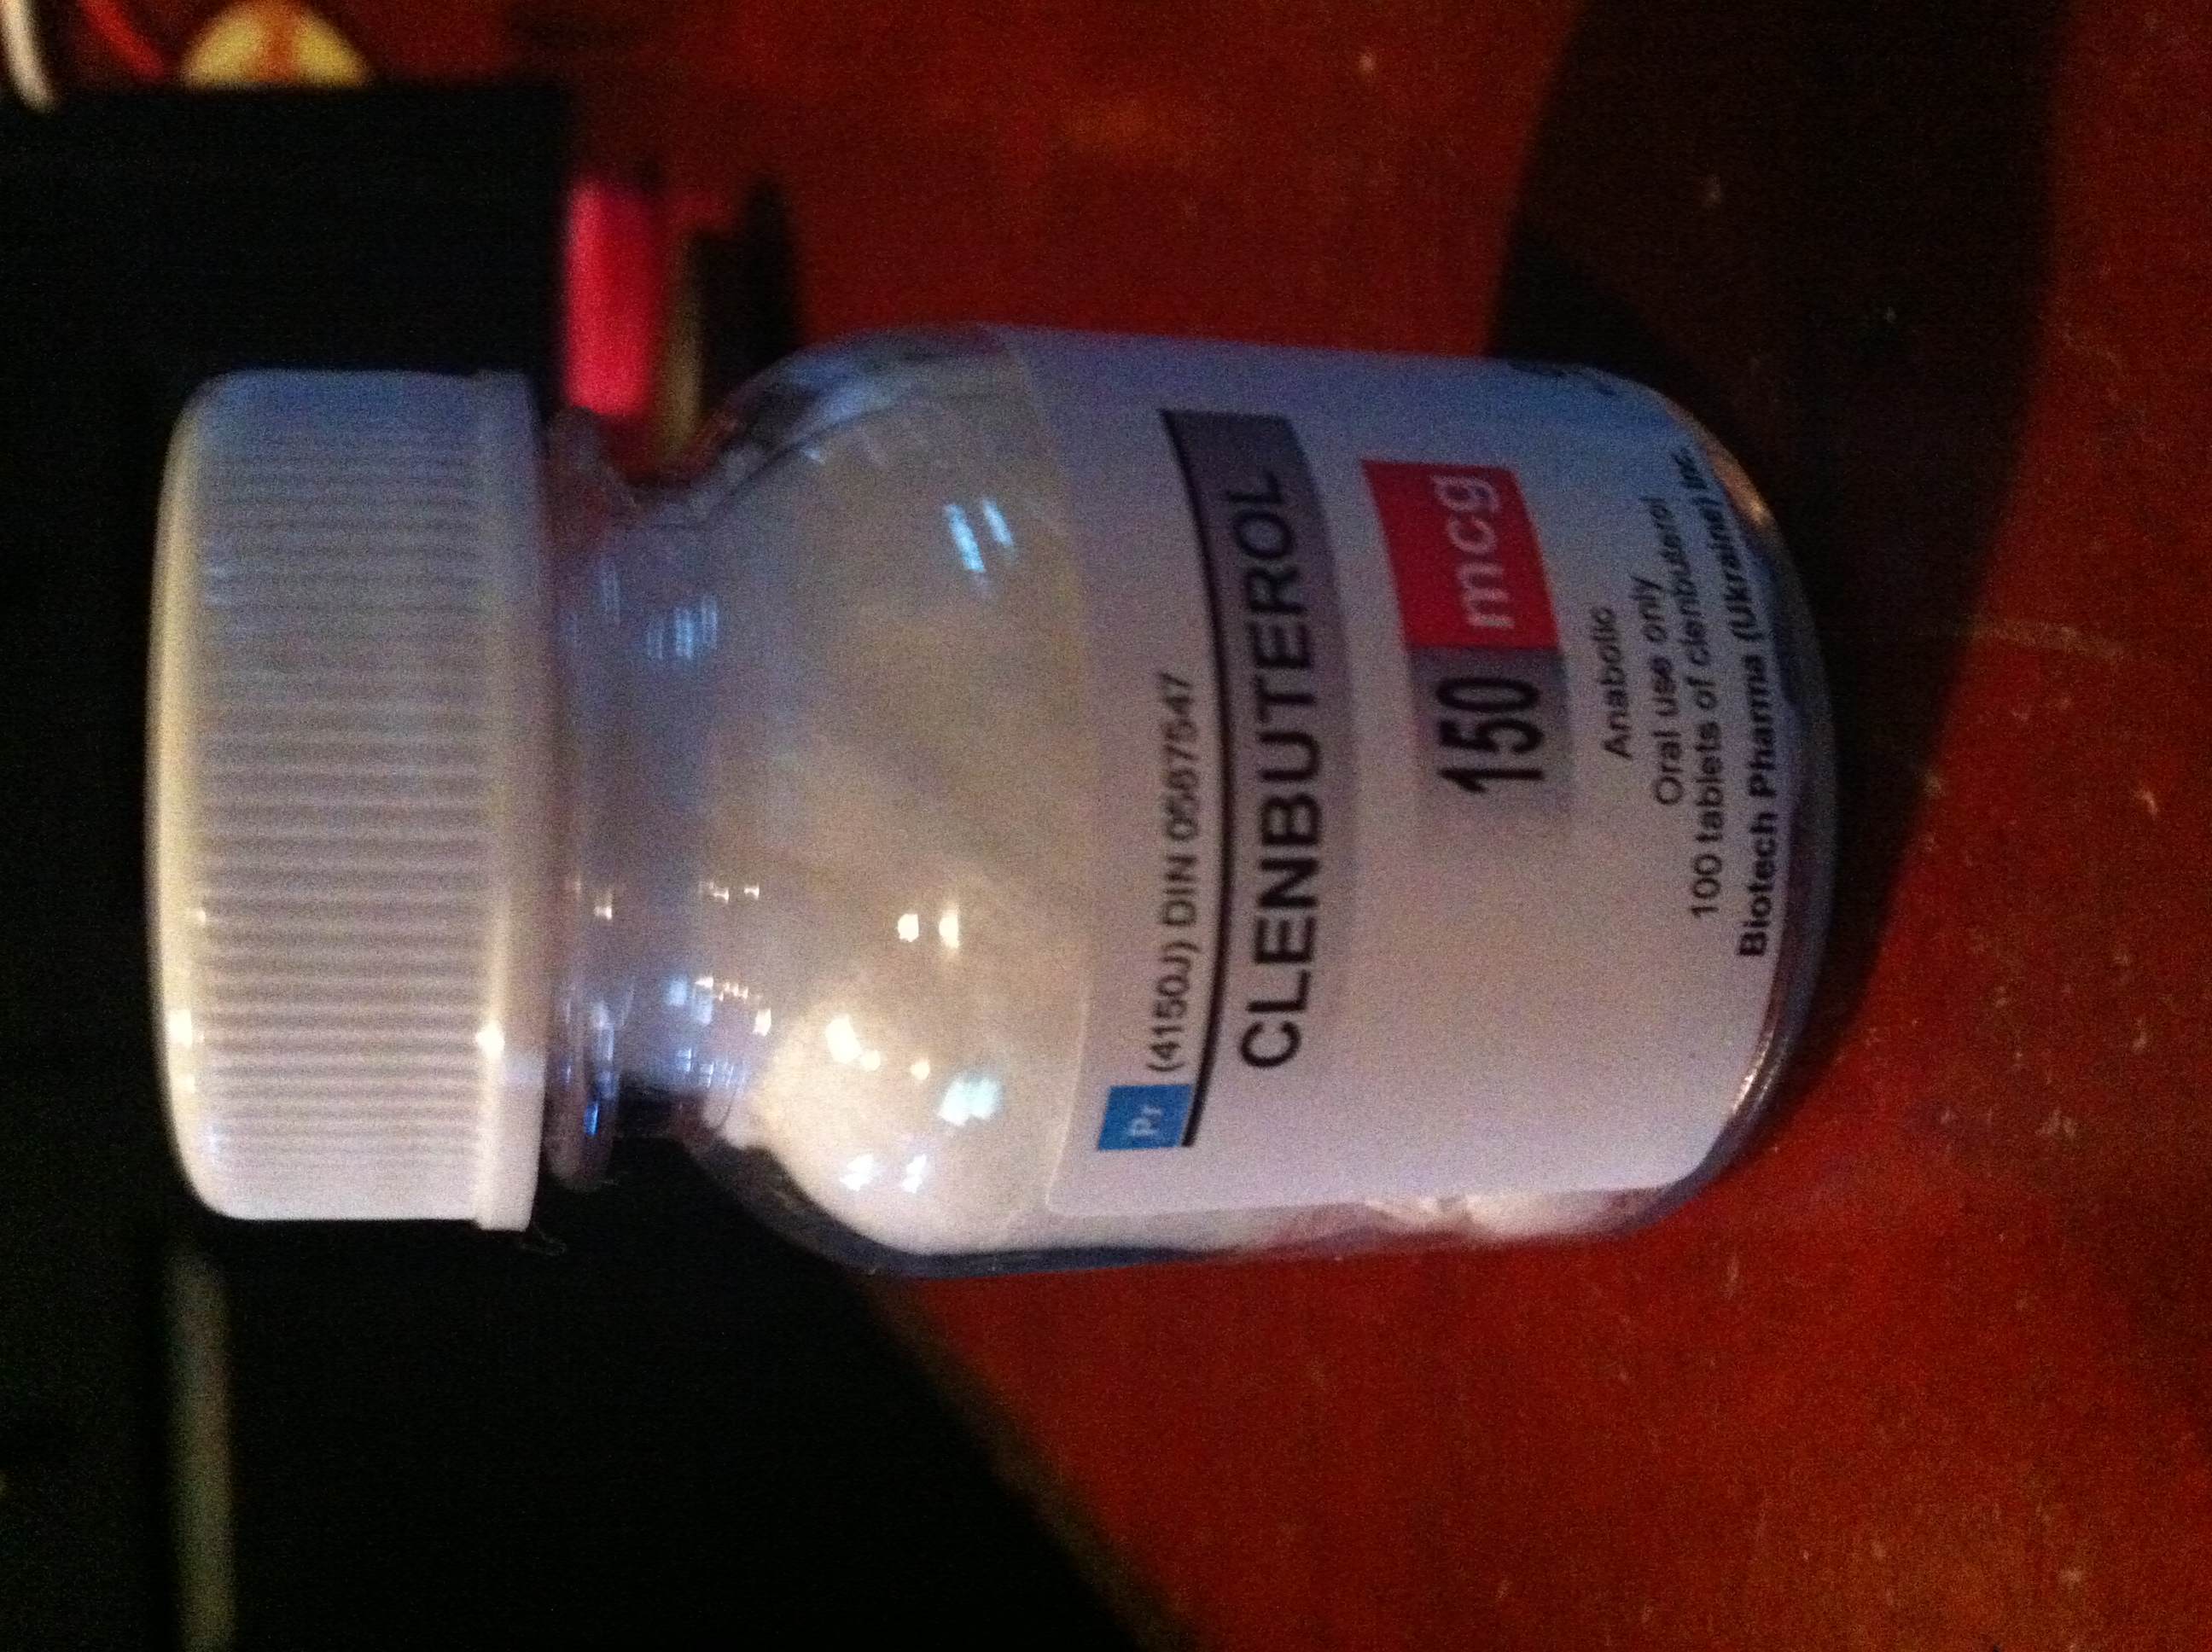 http://forums.steroid.com/attachments/anabolic-steroids-questions-answers/117720d1320022353-clenbuterol-clen-bottle.jpg